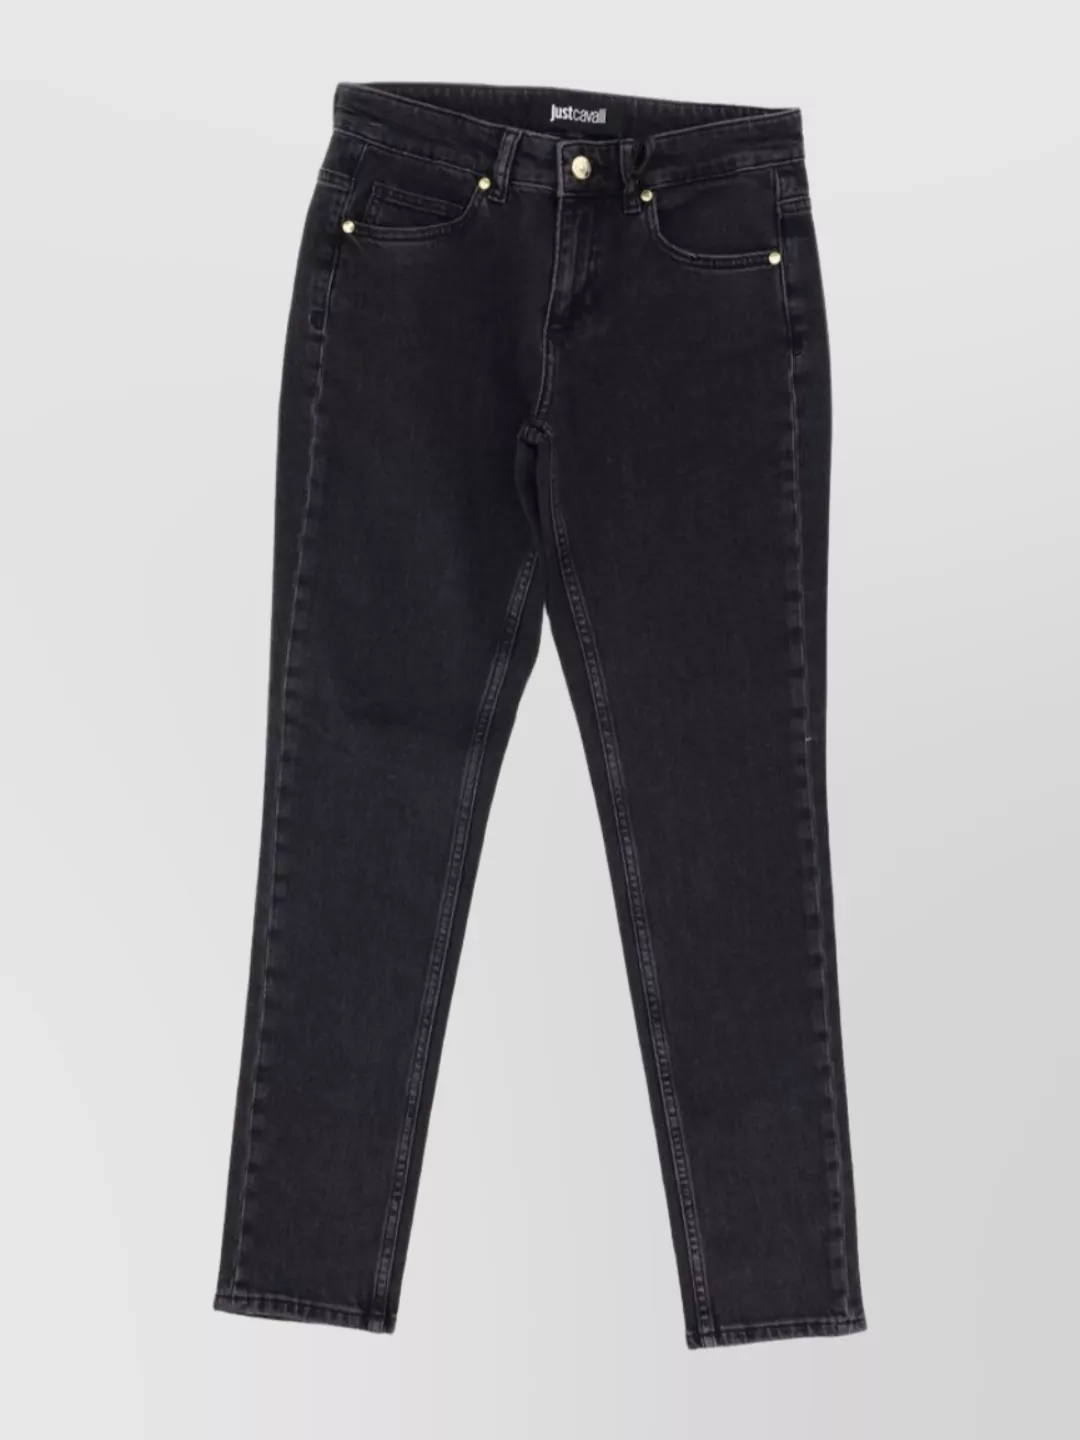 Shop Joseph Coleman Pant With Back Pocket Embroidery